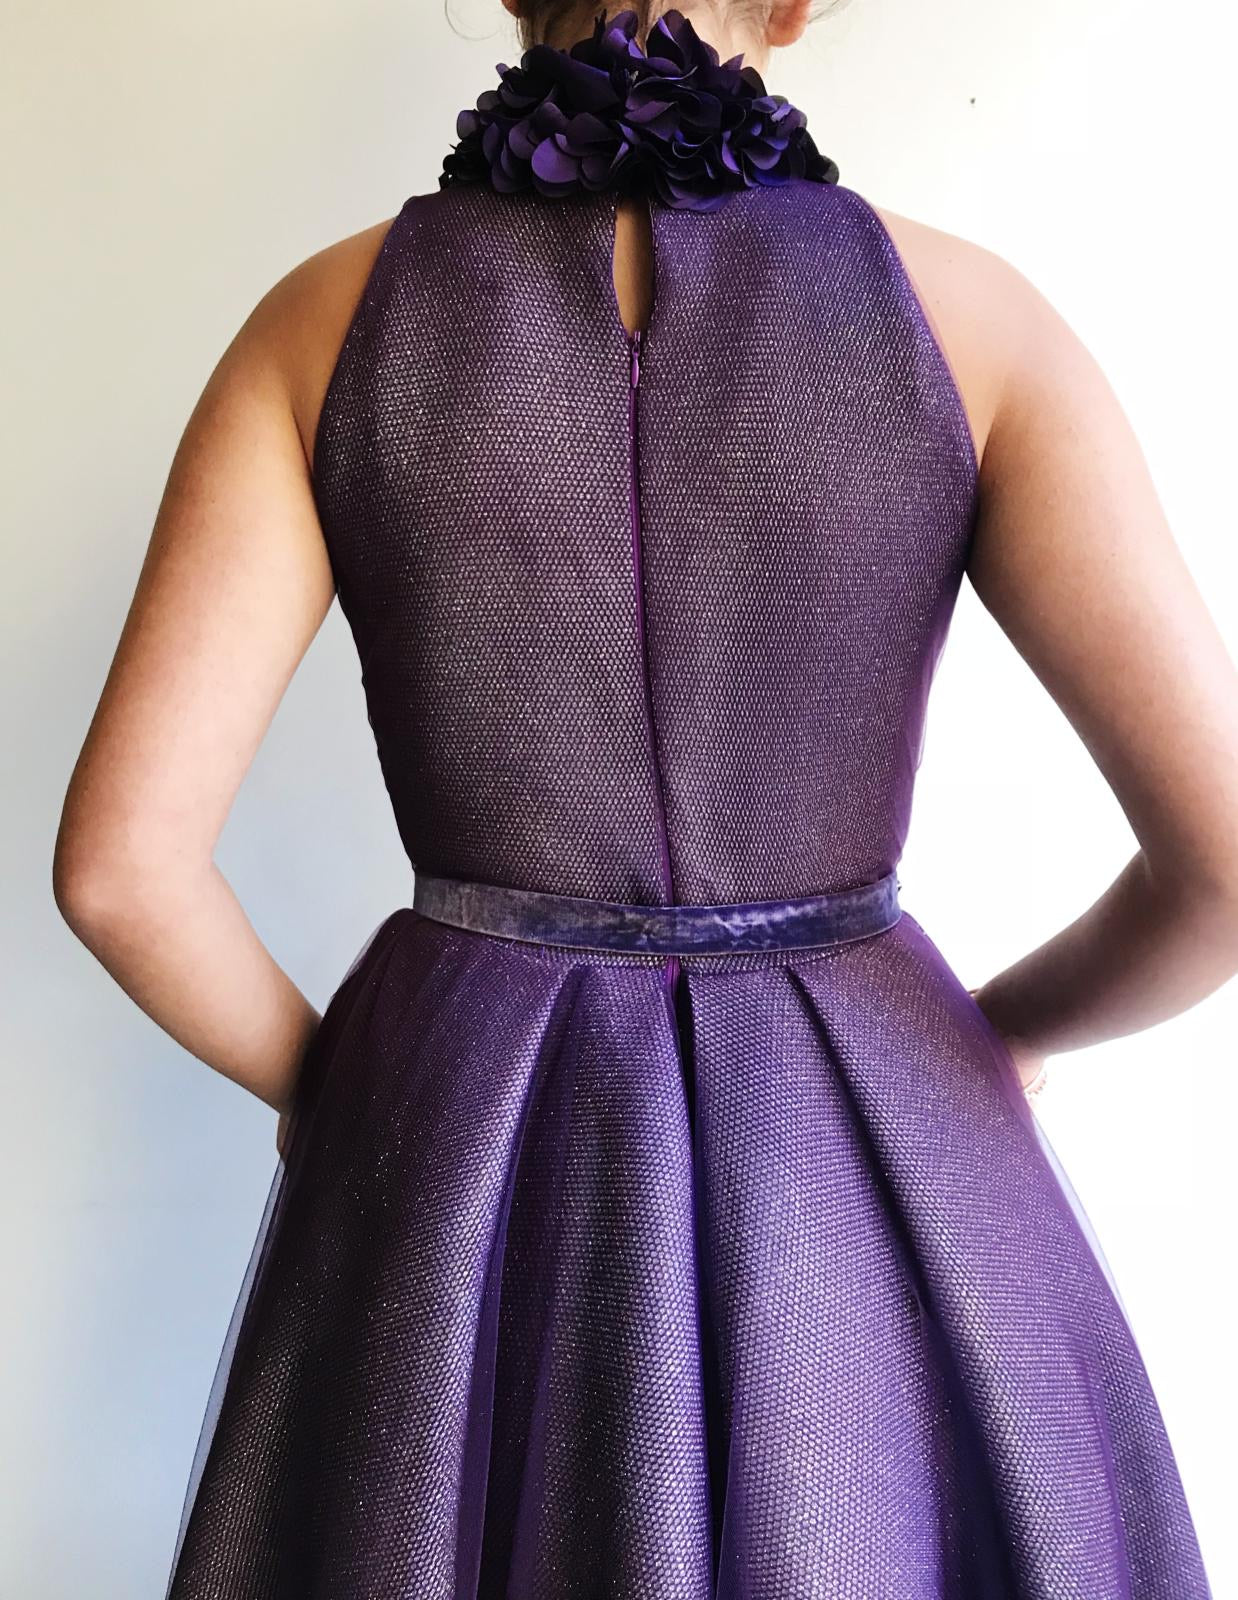 Purple A-Line dress with belt, embroidery and no sleeves